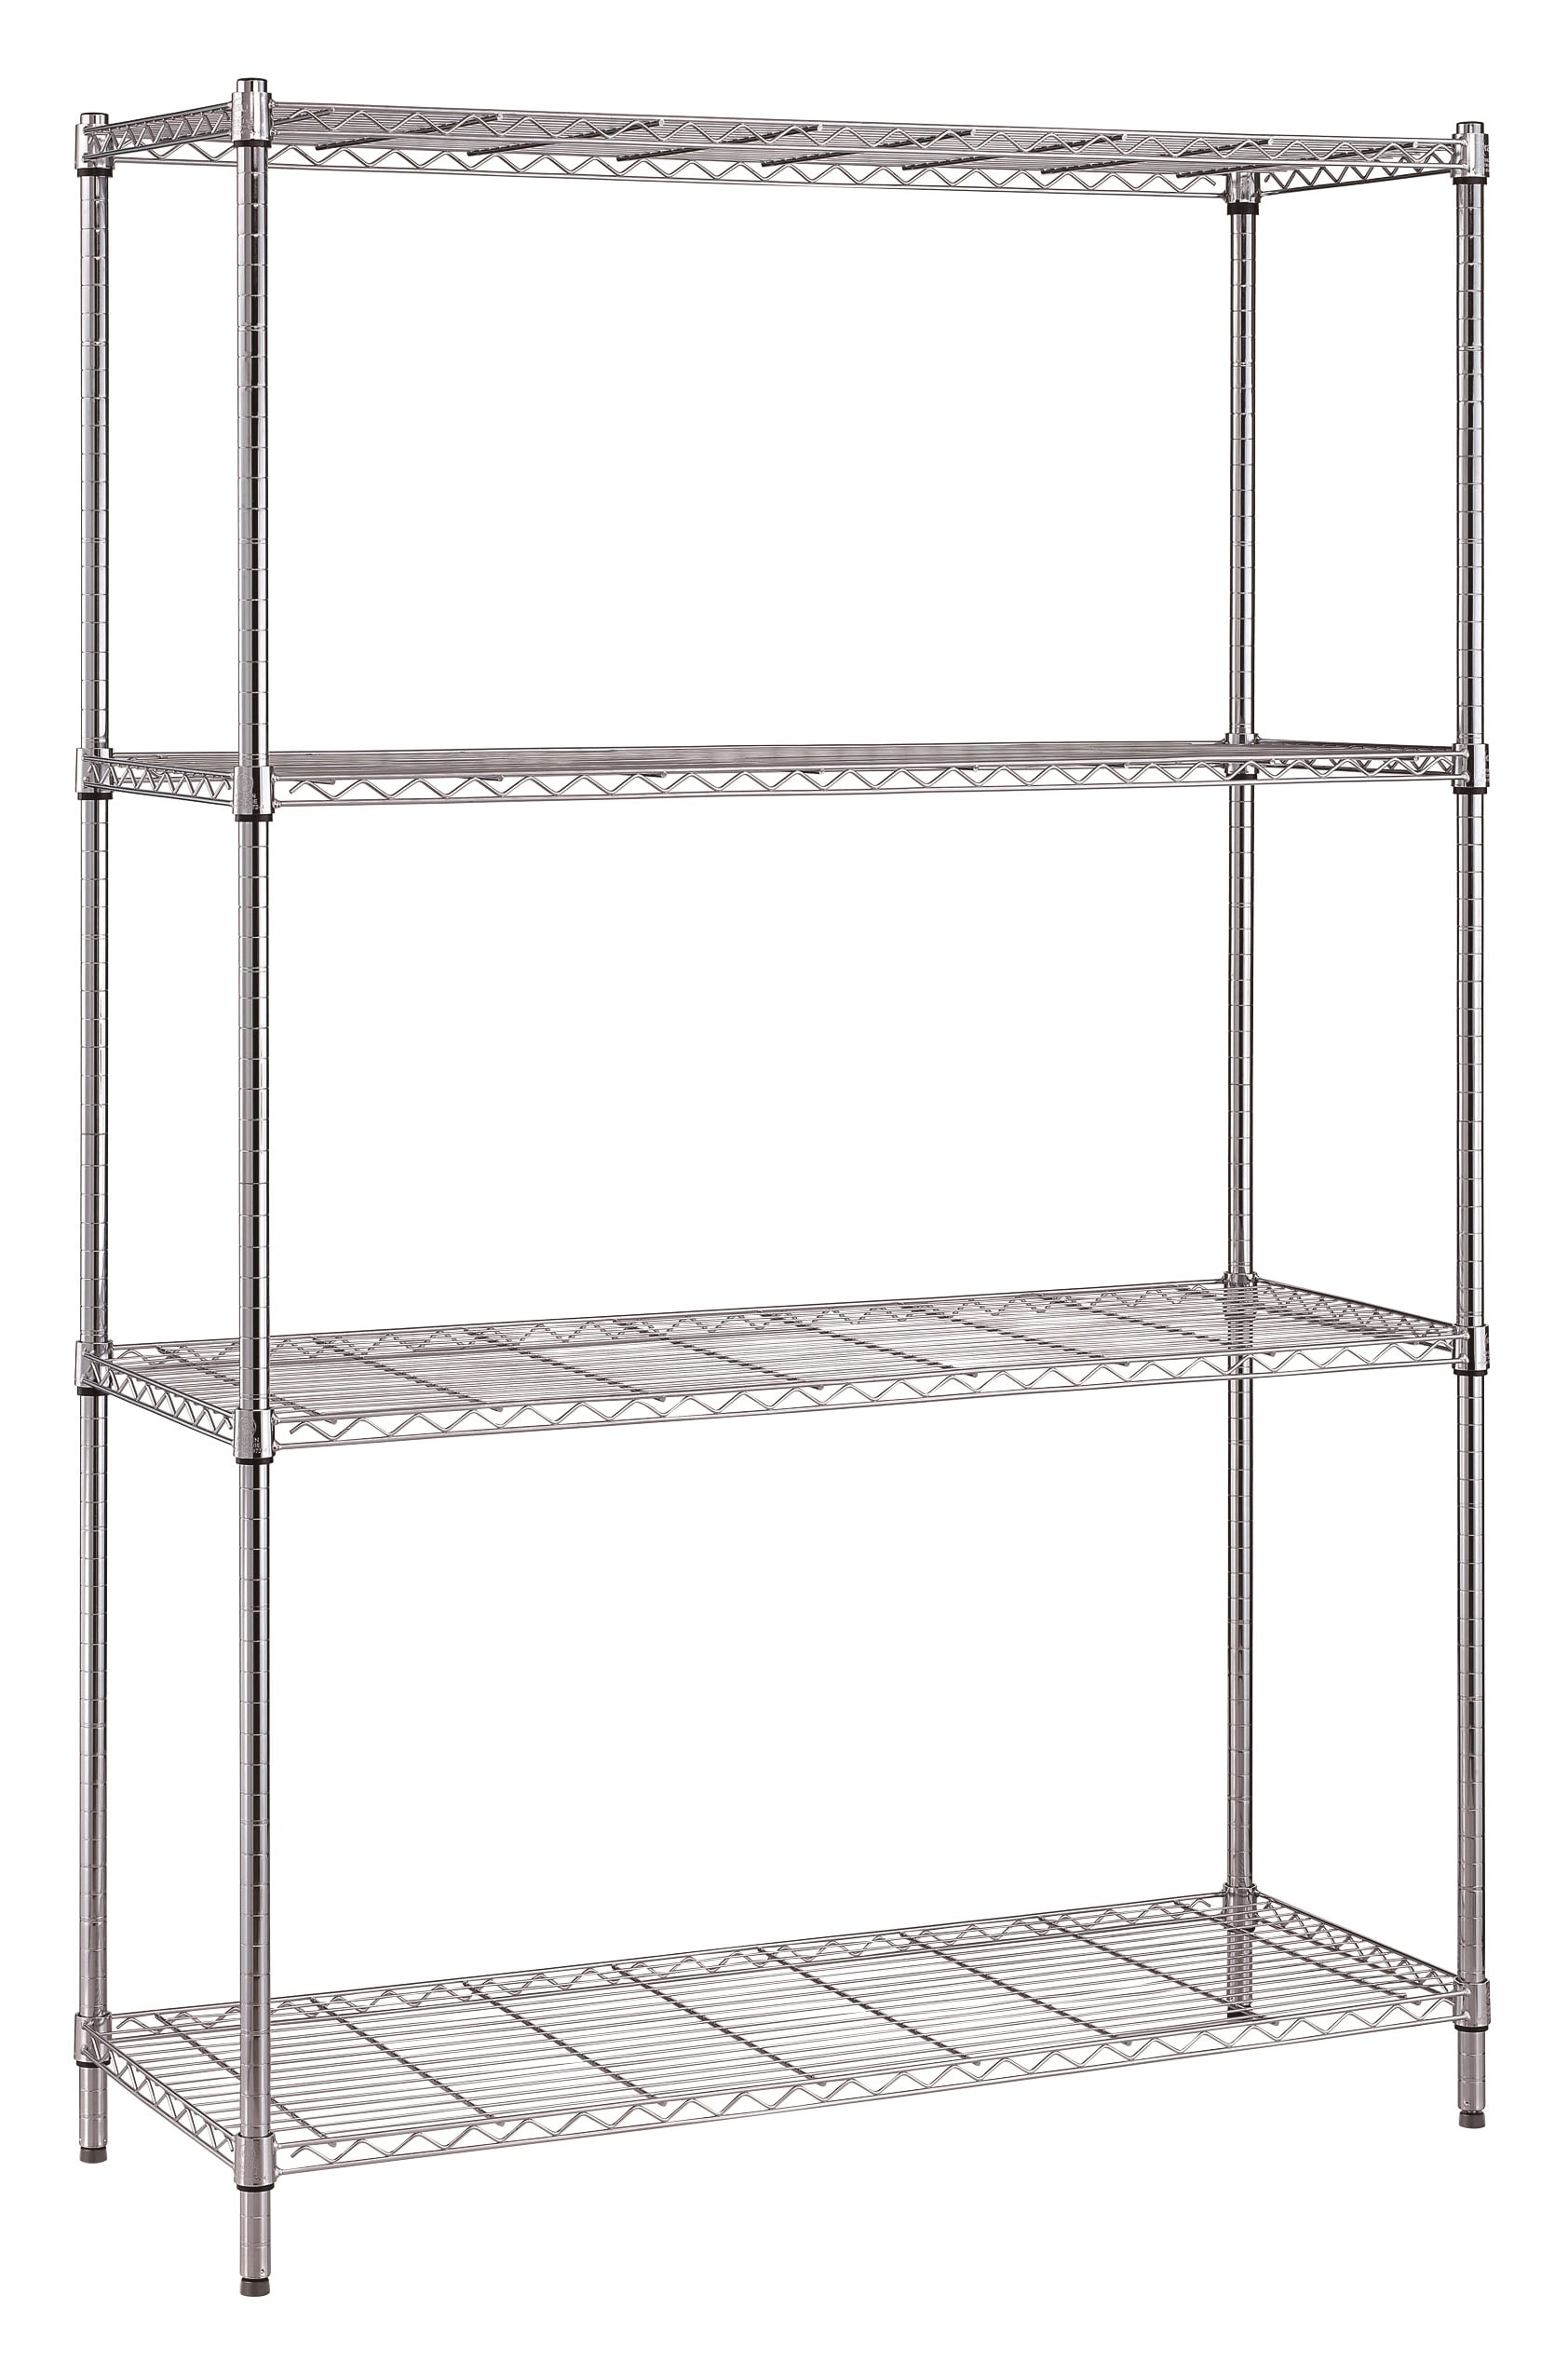 Chrome Finish Quantum Storage Systems WR54-1424C Starter Kit for 54 High 4-Tier Wire Shelving Unit 14 Width x 24 Length x 54 Height 